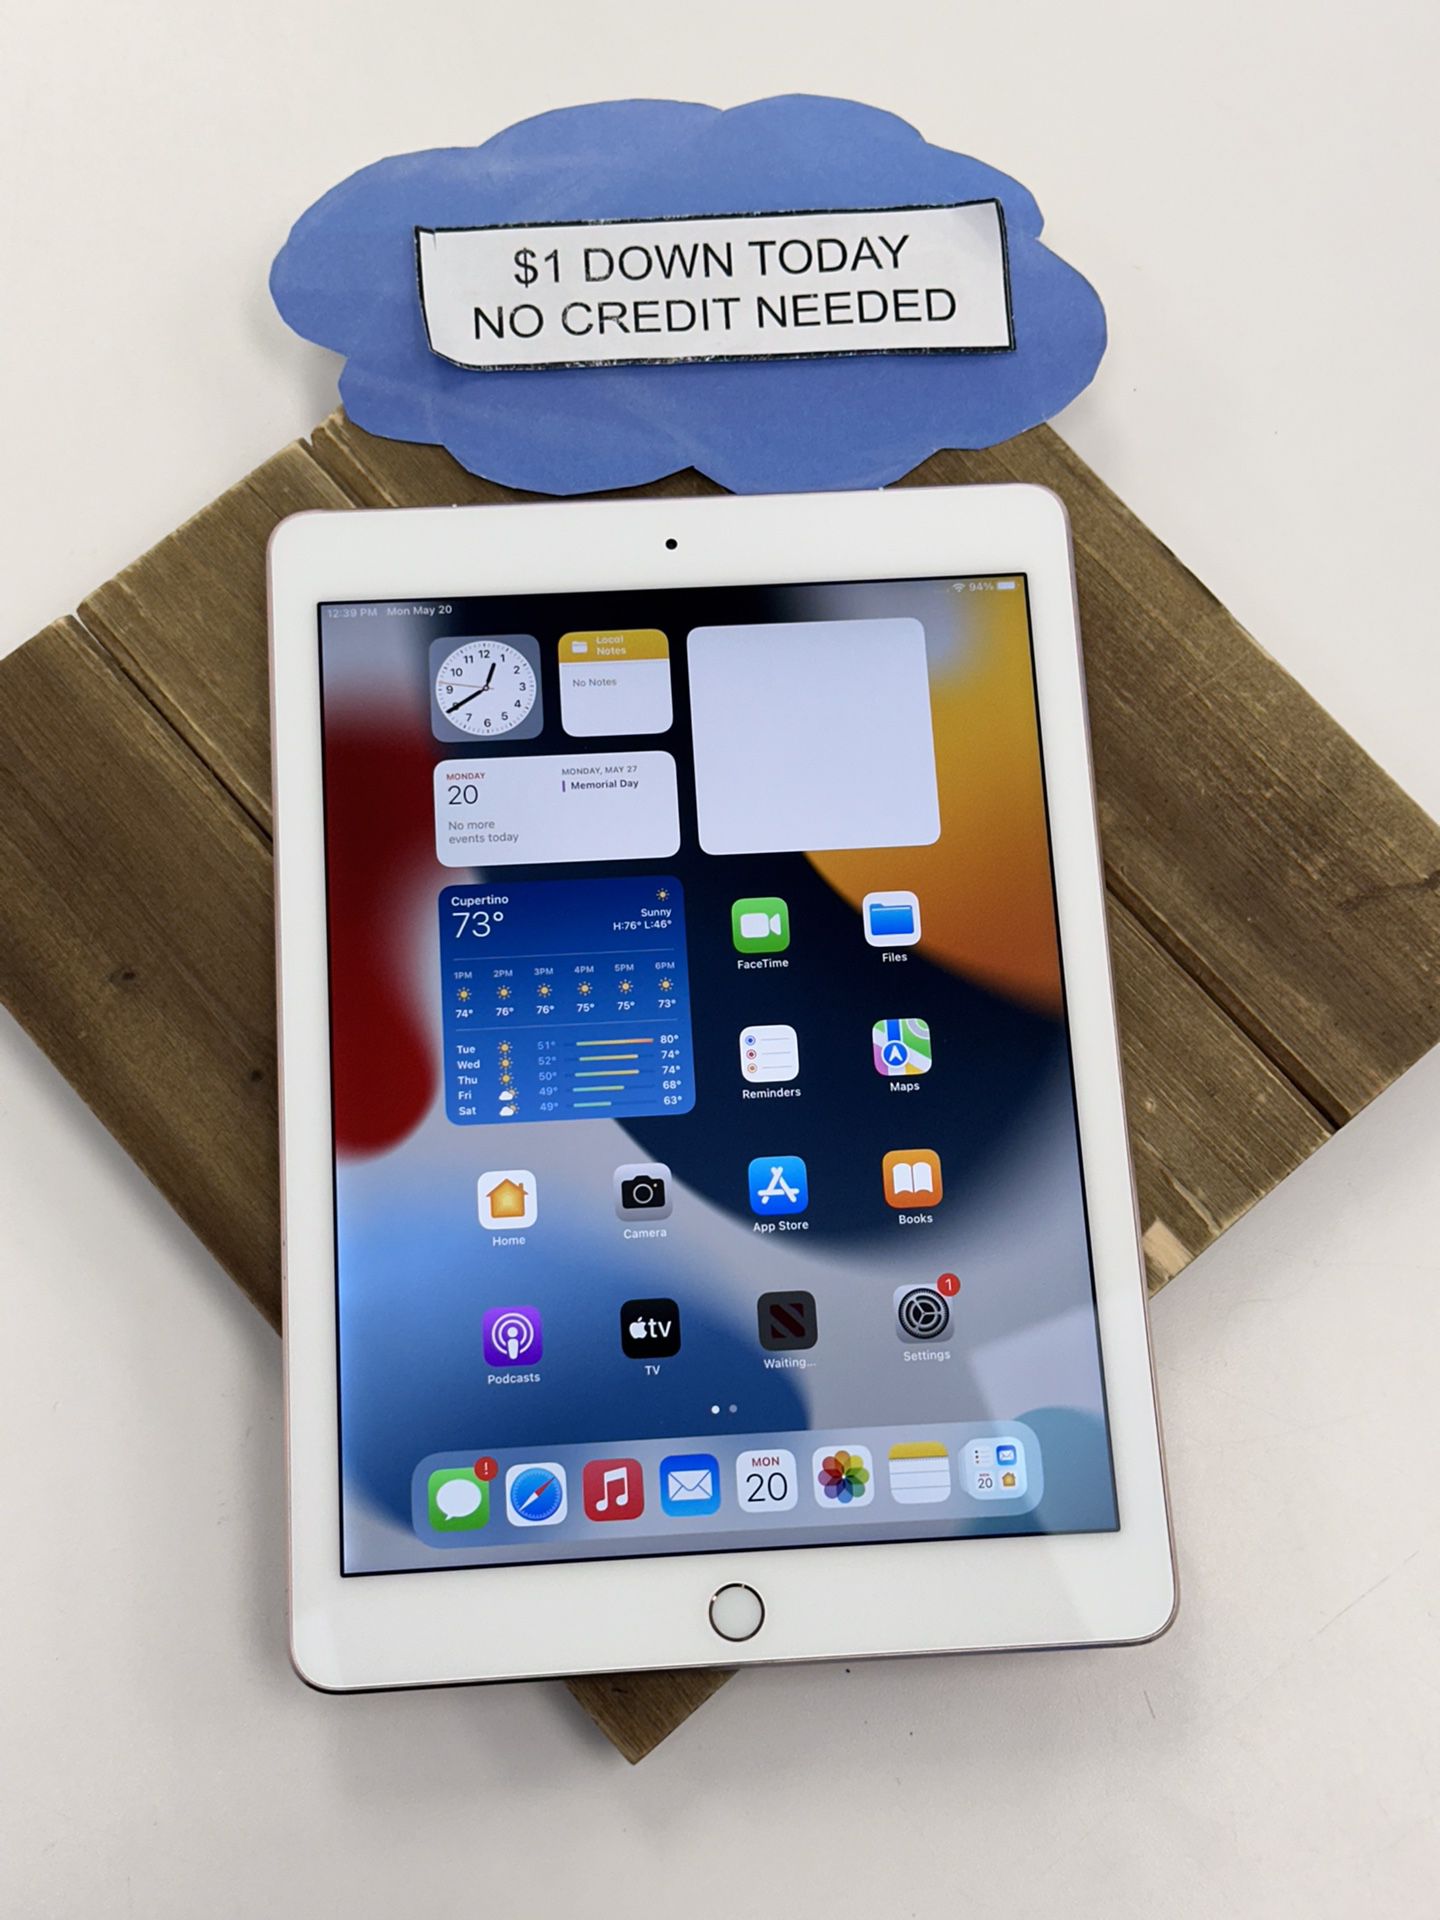 Apple IPAD Pro 9.7in Tablet - Pay $1 Today to Take it Home and Pay the Rest Later!